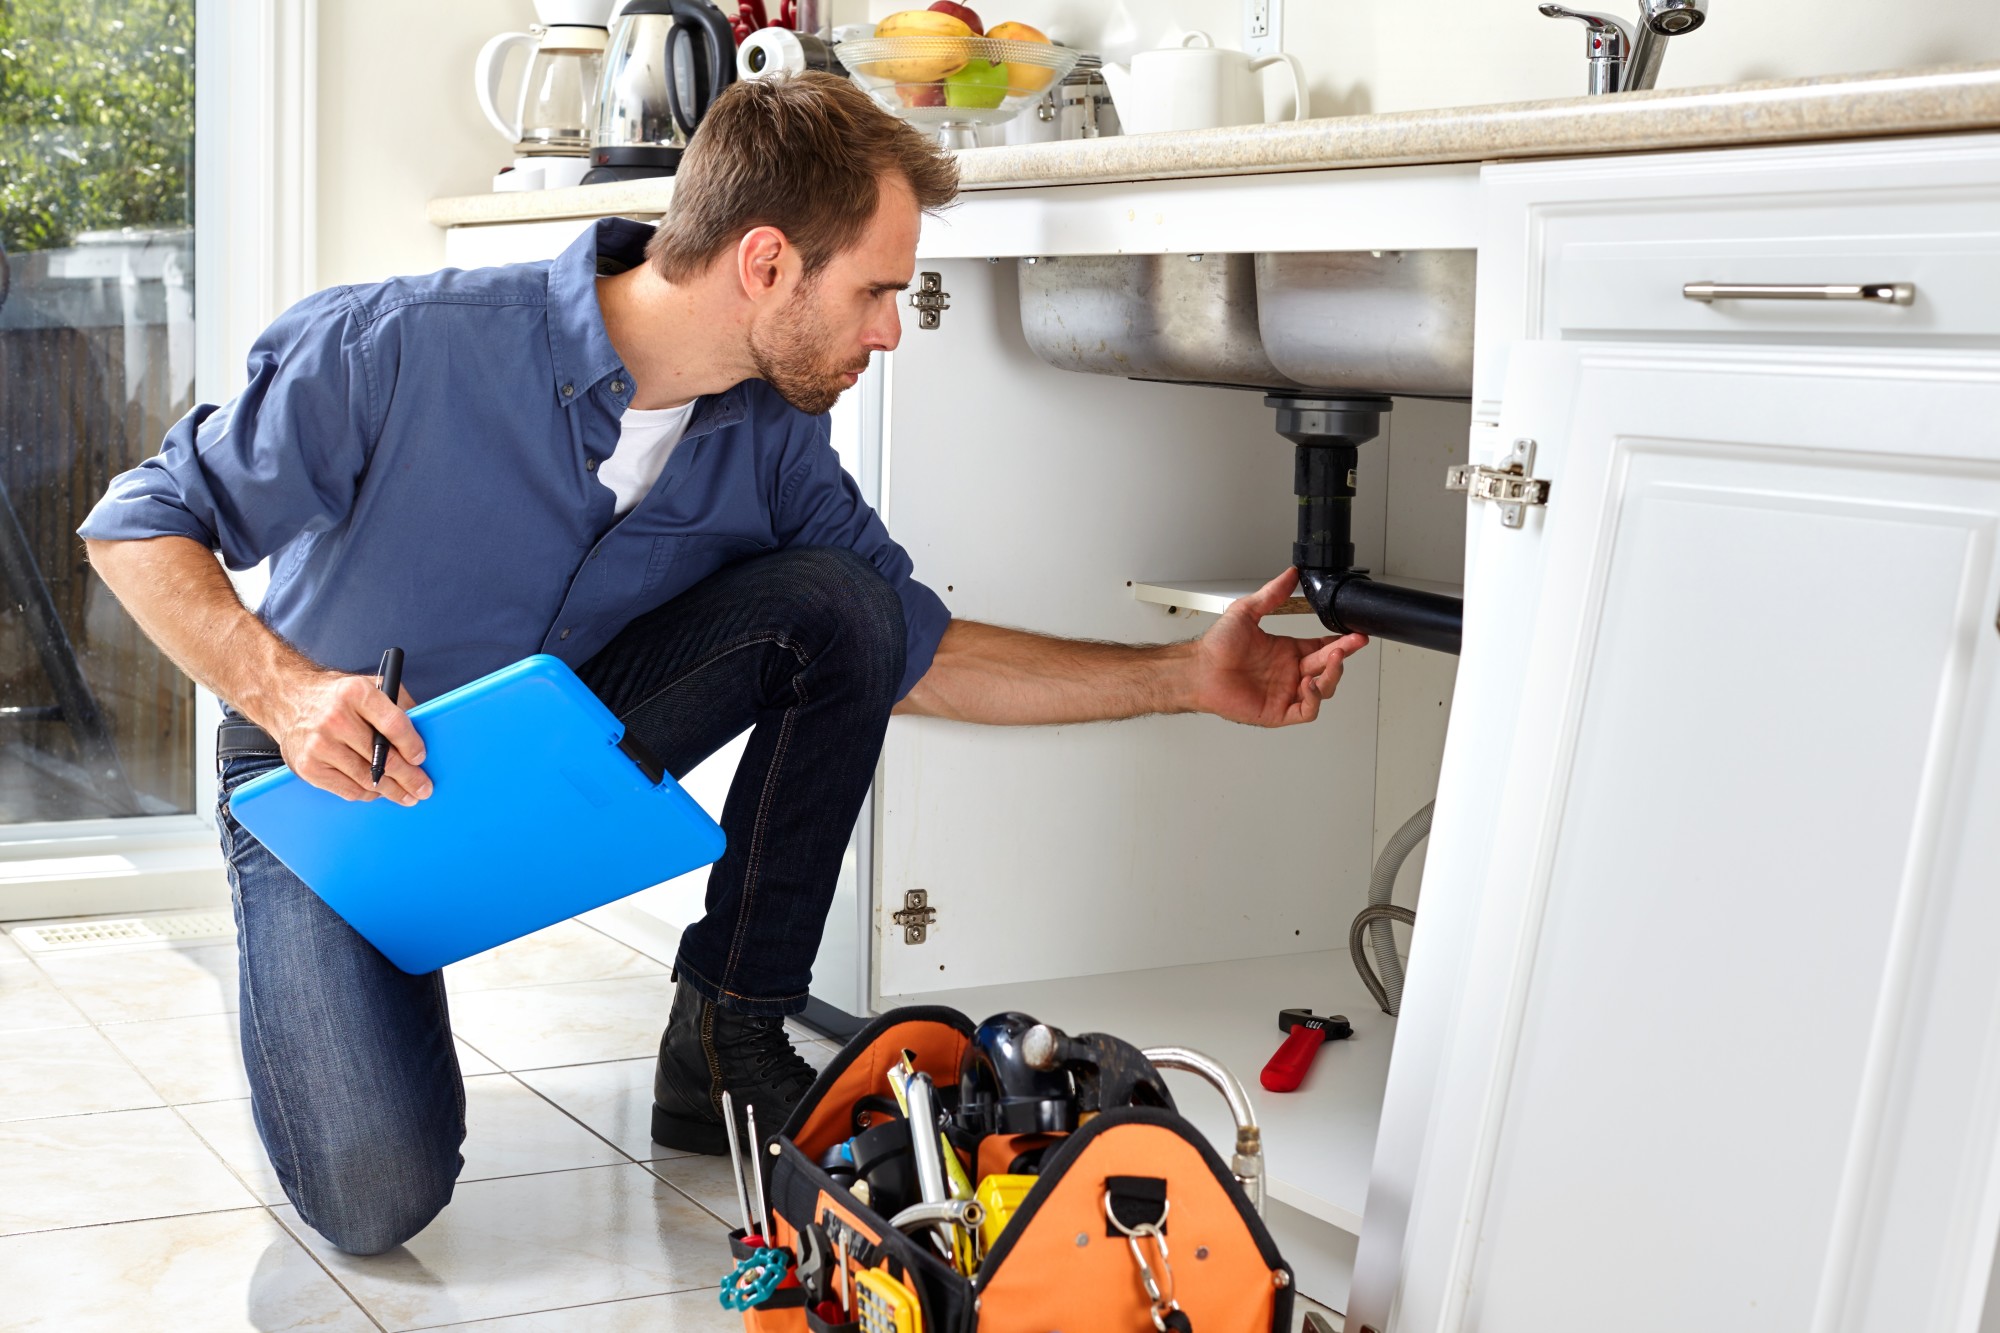 Battling Hairballs and Food Scraps: When to Call a Plumber for a Clogged Sink Drain